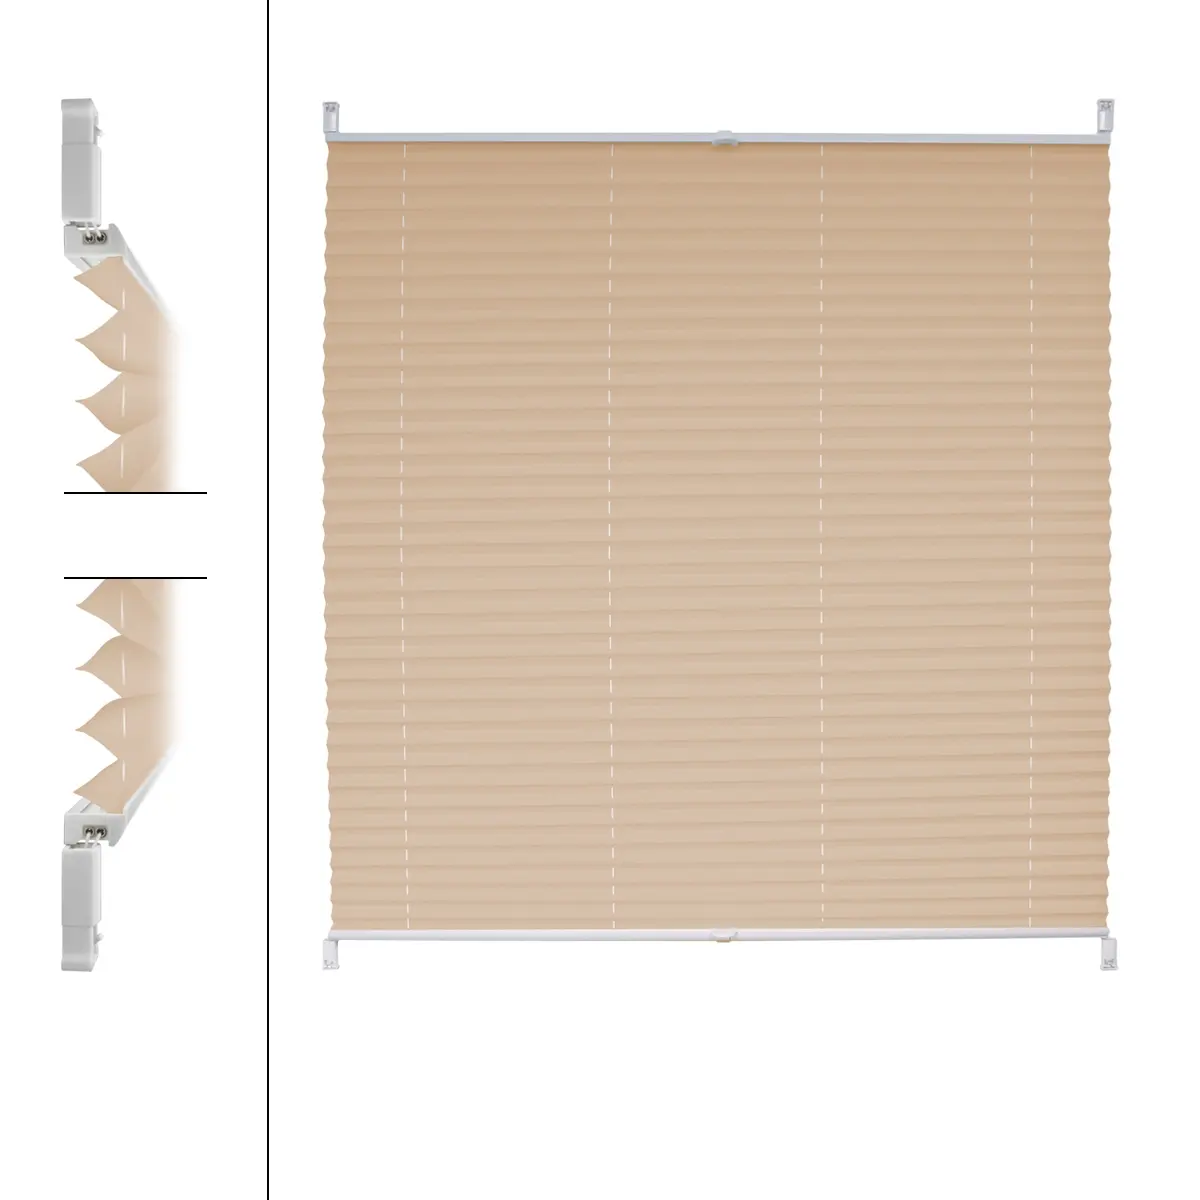 Self-Adhesive Blackout Pleated Paper Shade Pleated Blinds Curtains no drilling easy fix temporary pleated blinds